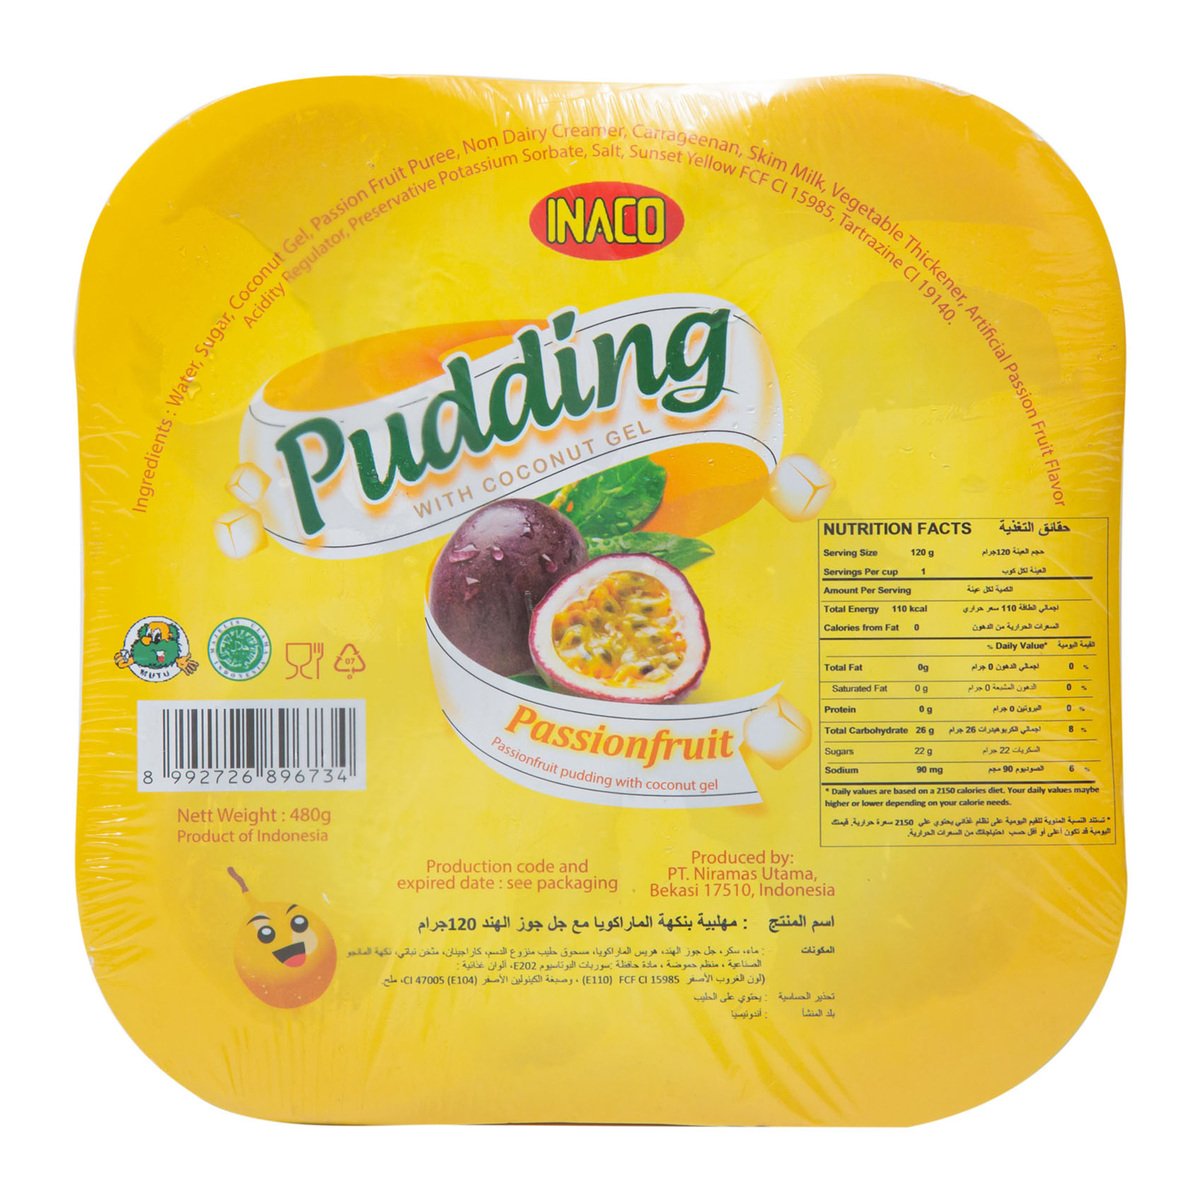 Inaco Pudding With Coconut Gel Passionfruit 480 g